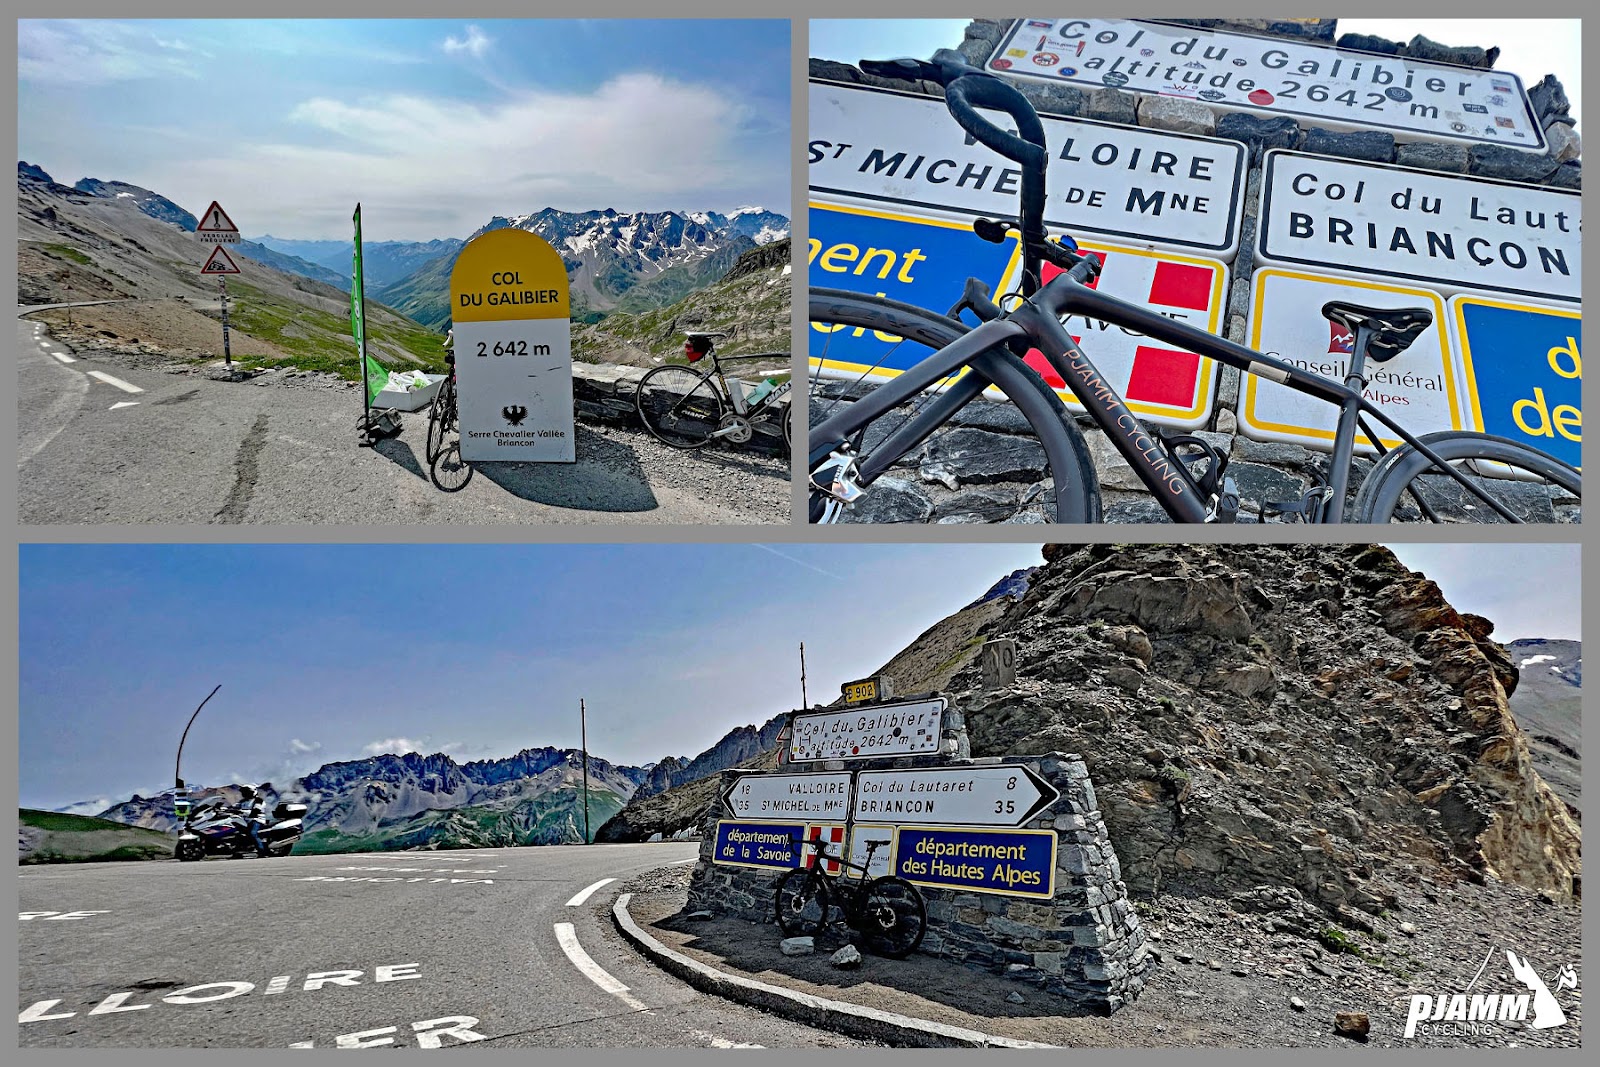 Cycling Col du Galibier from Valloire: photo collage shows road signs, kilometer marker signs, and views at climb's finish